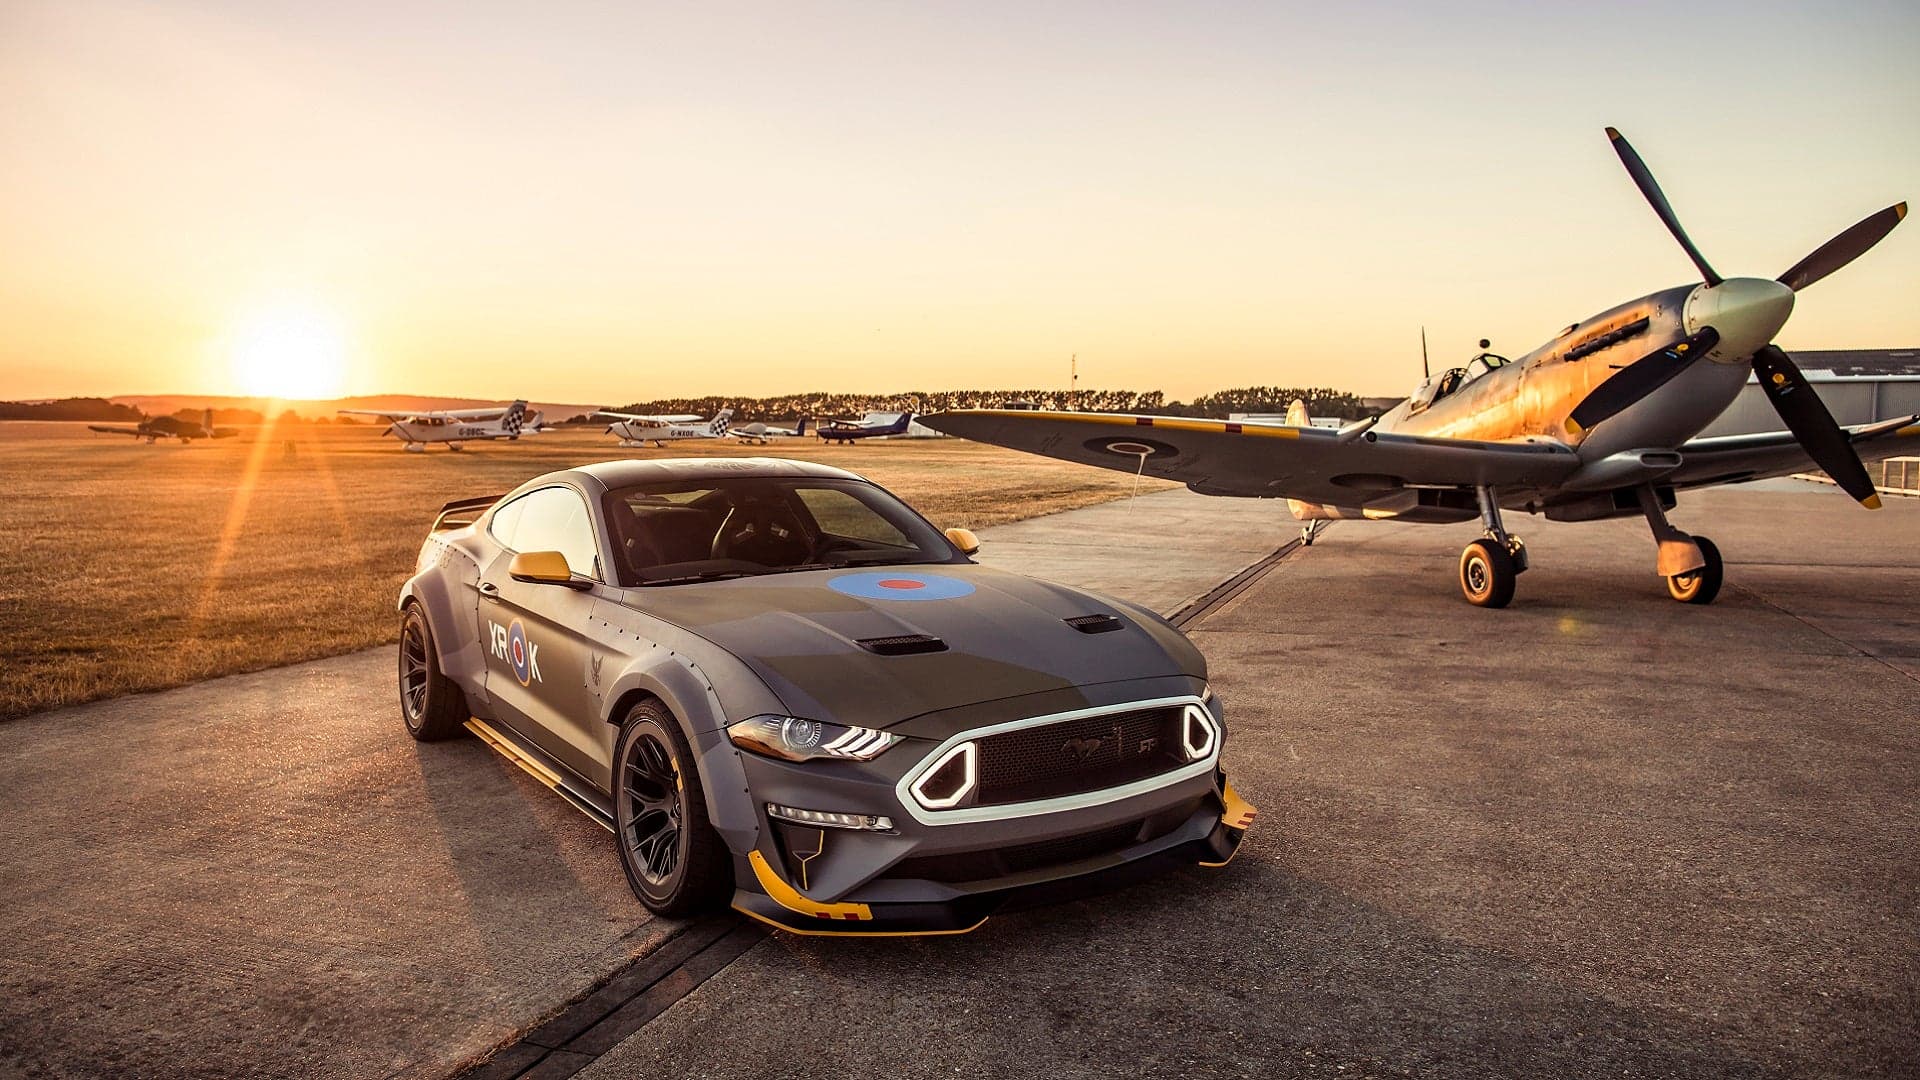 Vaughn Gittin Jr. to Pilot a Ford Eagle Squadron Mustang GT at Goodwood Festival of Speed